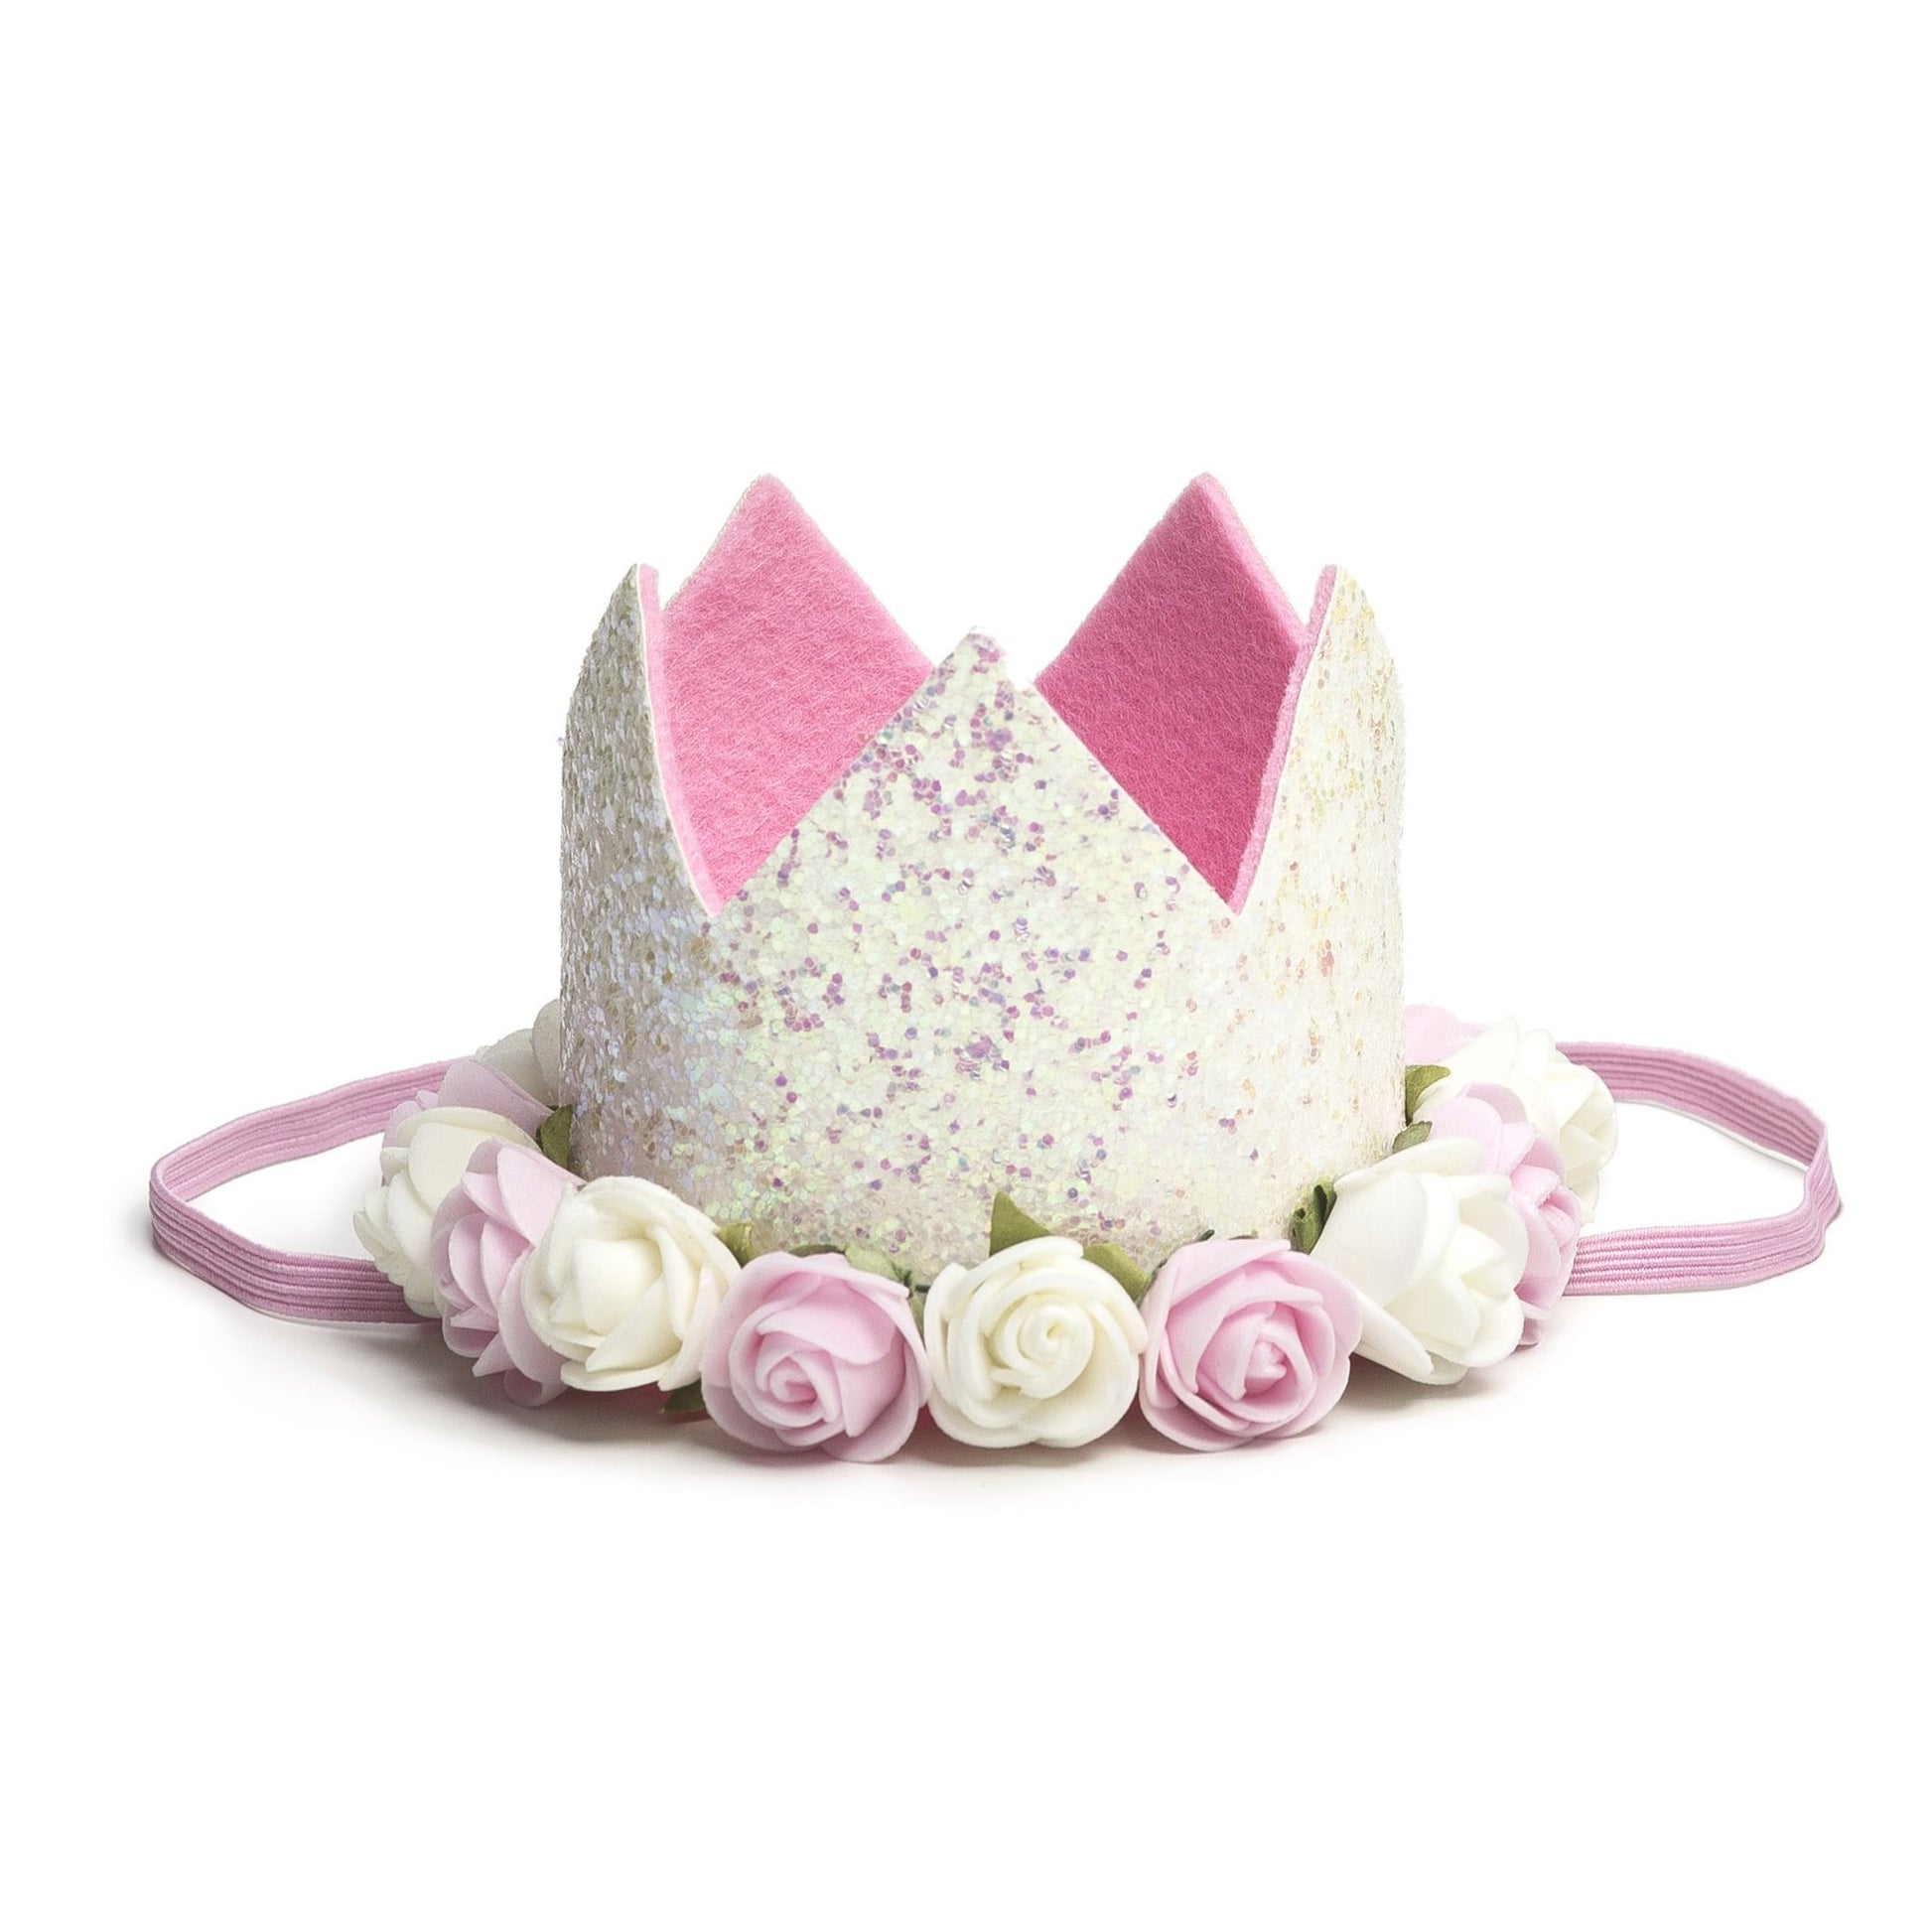 Sweet Wink - The White Flower Crown is the perfect addition to any birthday party or everyday dress up! Since this crown does not have a number on it, it can be worn for multiple occasions. Makes a great birthday present for any little girl in your life! Item description:  White glitter crown Pink and ivory flowers trim the base of the crown Light pink felt lining inside the crown and on the bottom of the crown to ensure comfort and softness on the child's head Light pink elastic to secure crown to child's 